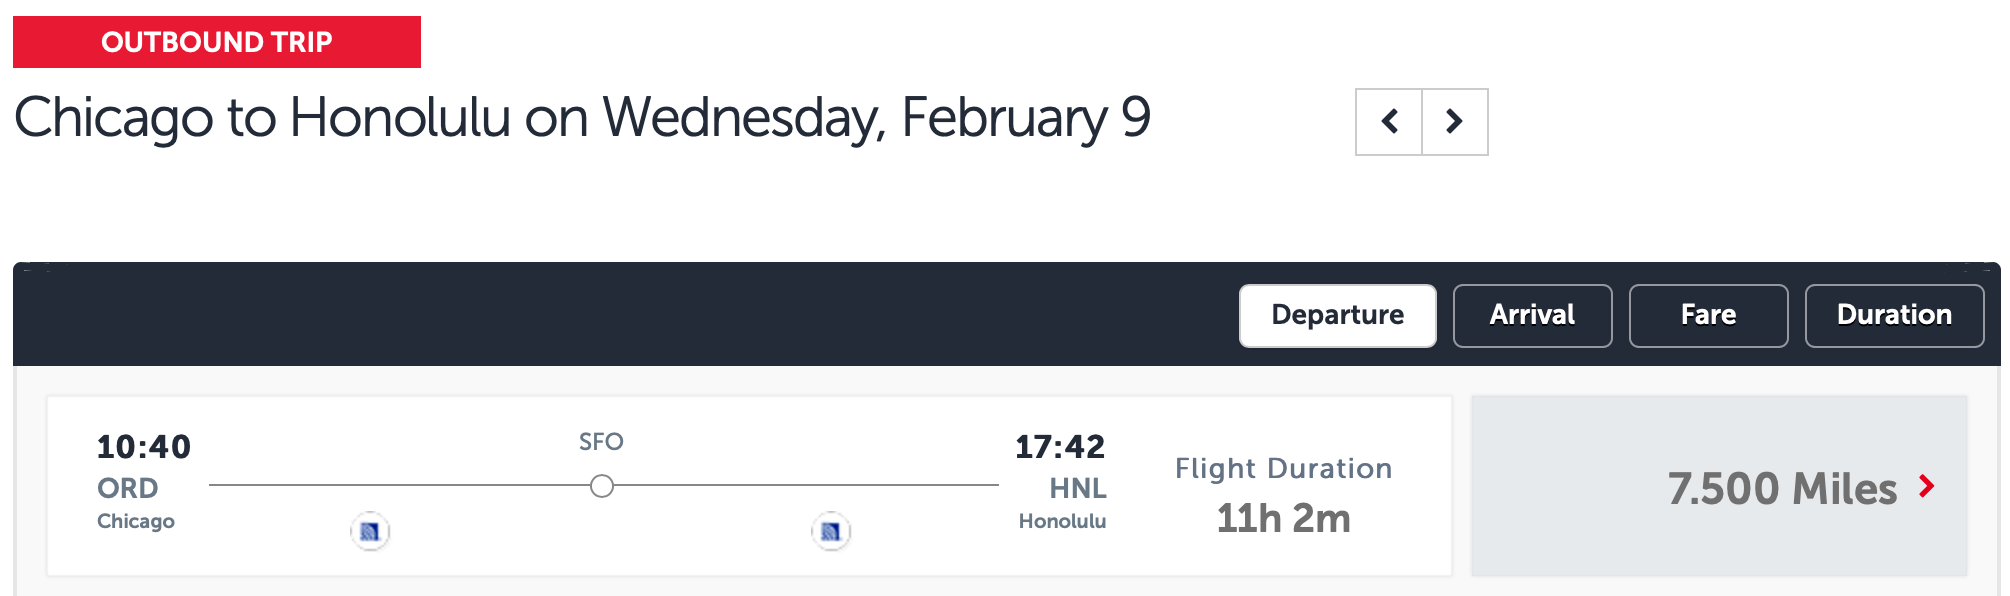 ORD to HNL via SFO Turkish Airlines award ticket